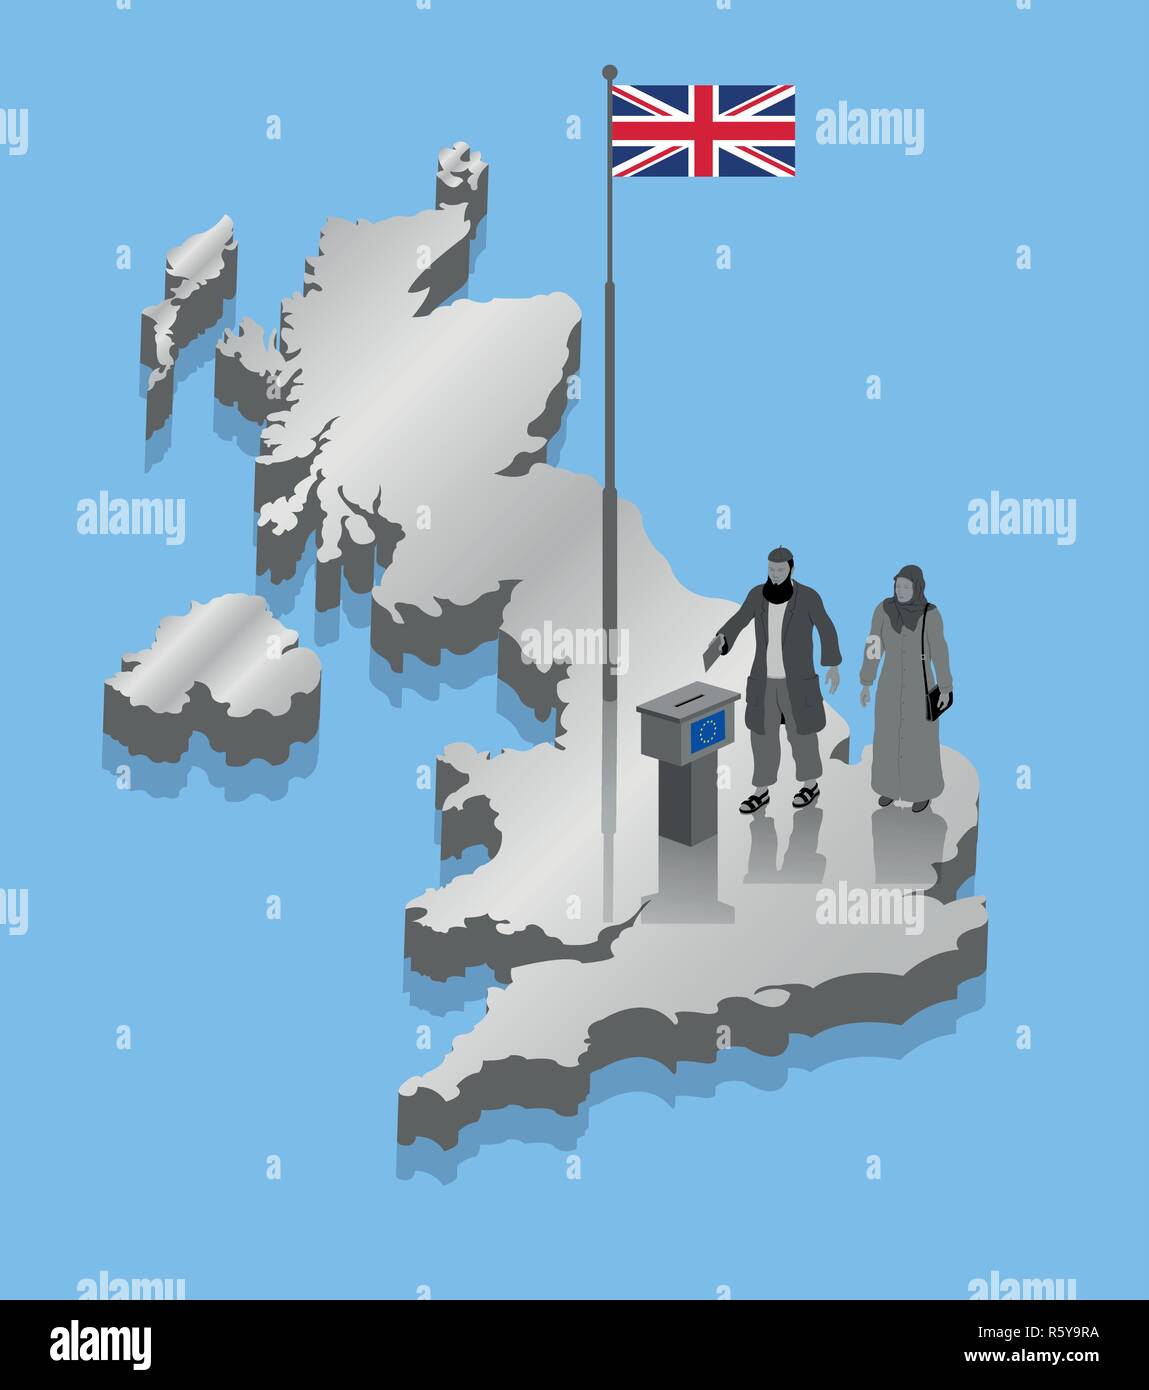 Religious muslim migrant voters are voting for Brexit over UK map. All the objects, shadows and background are in different layers. Stock Vector